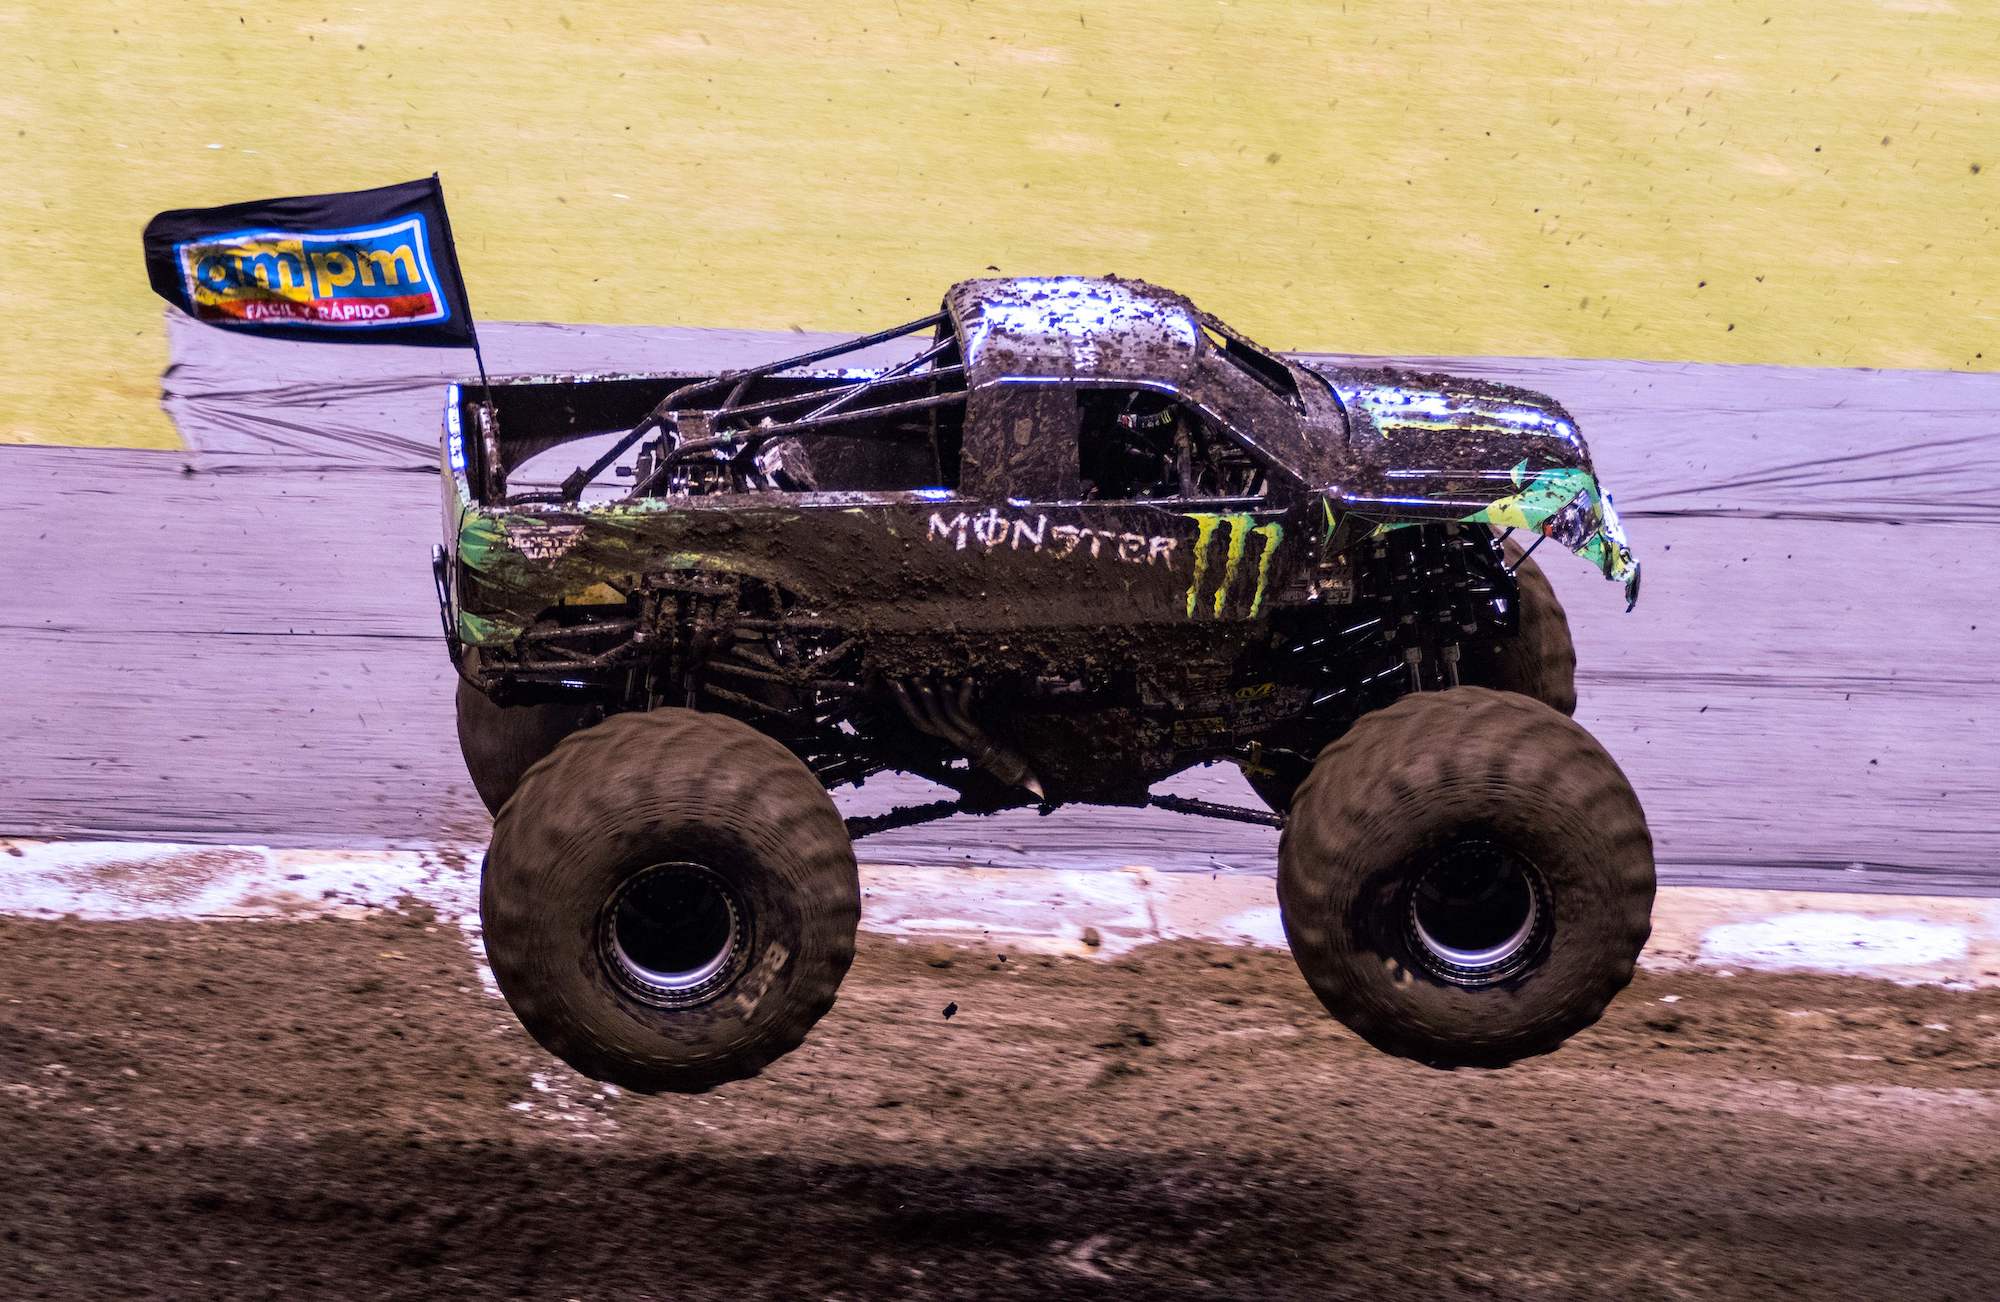 A monster truck performs at Monster Jam in San Jose, Costa Rica, on December 14, 2018